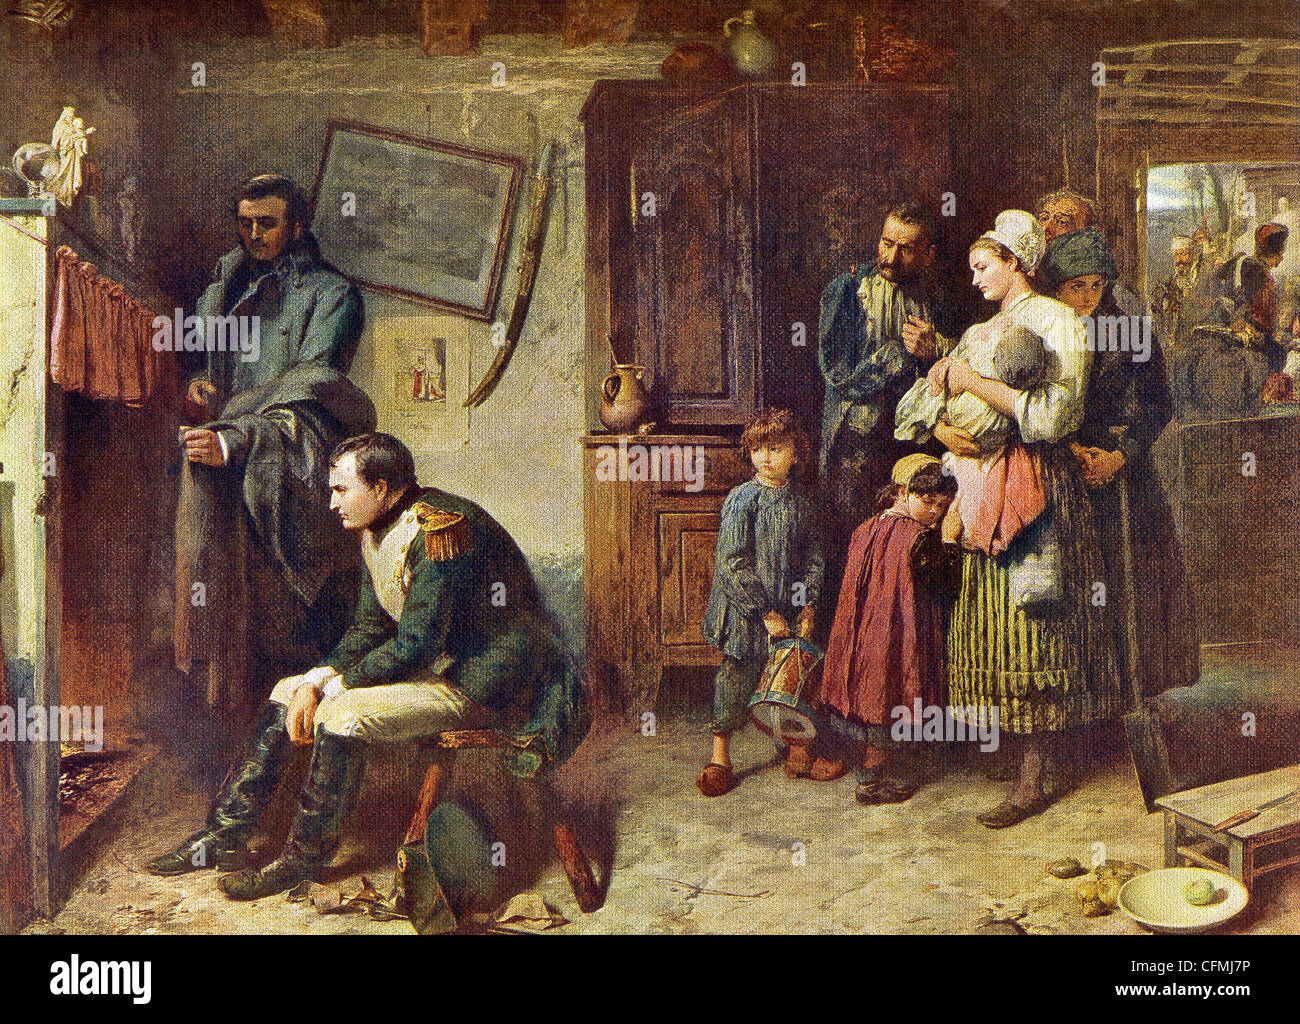 Here Napoleon is shown at a peasant's house after being defeated at the Battle of Waterloo. Stock Photo